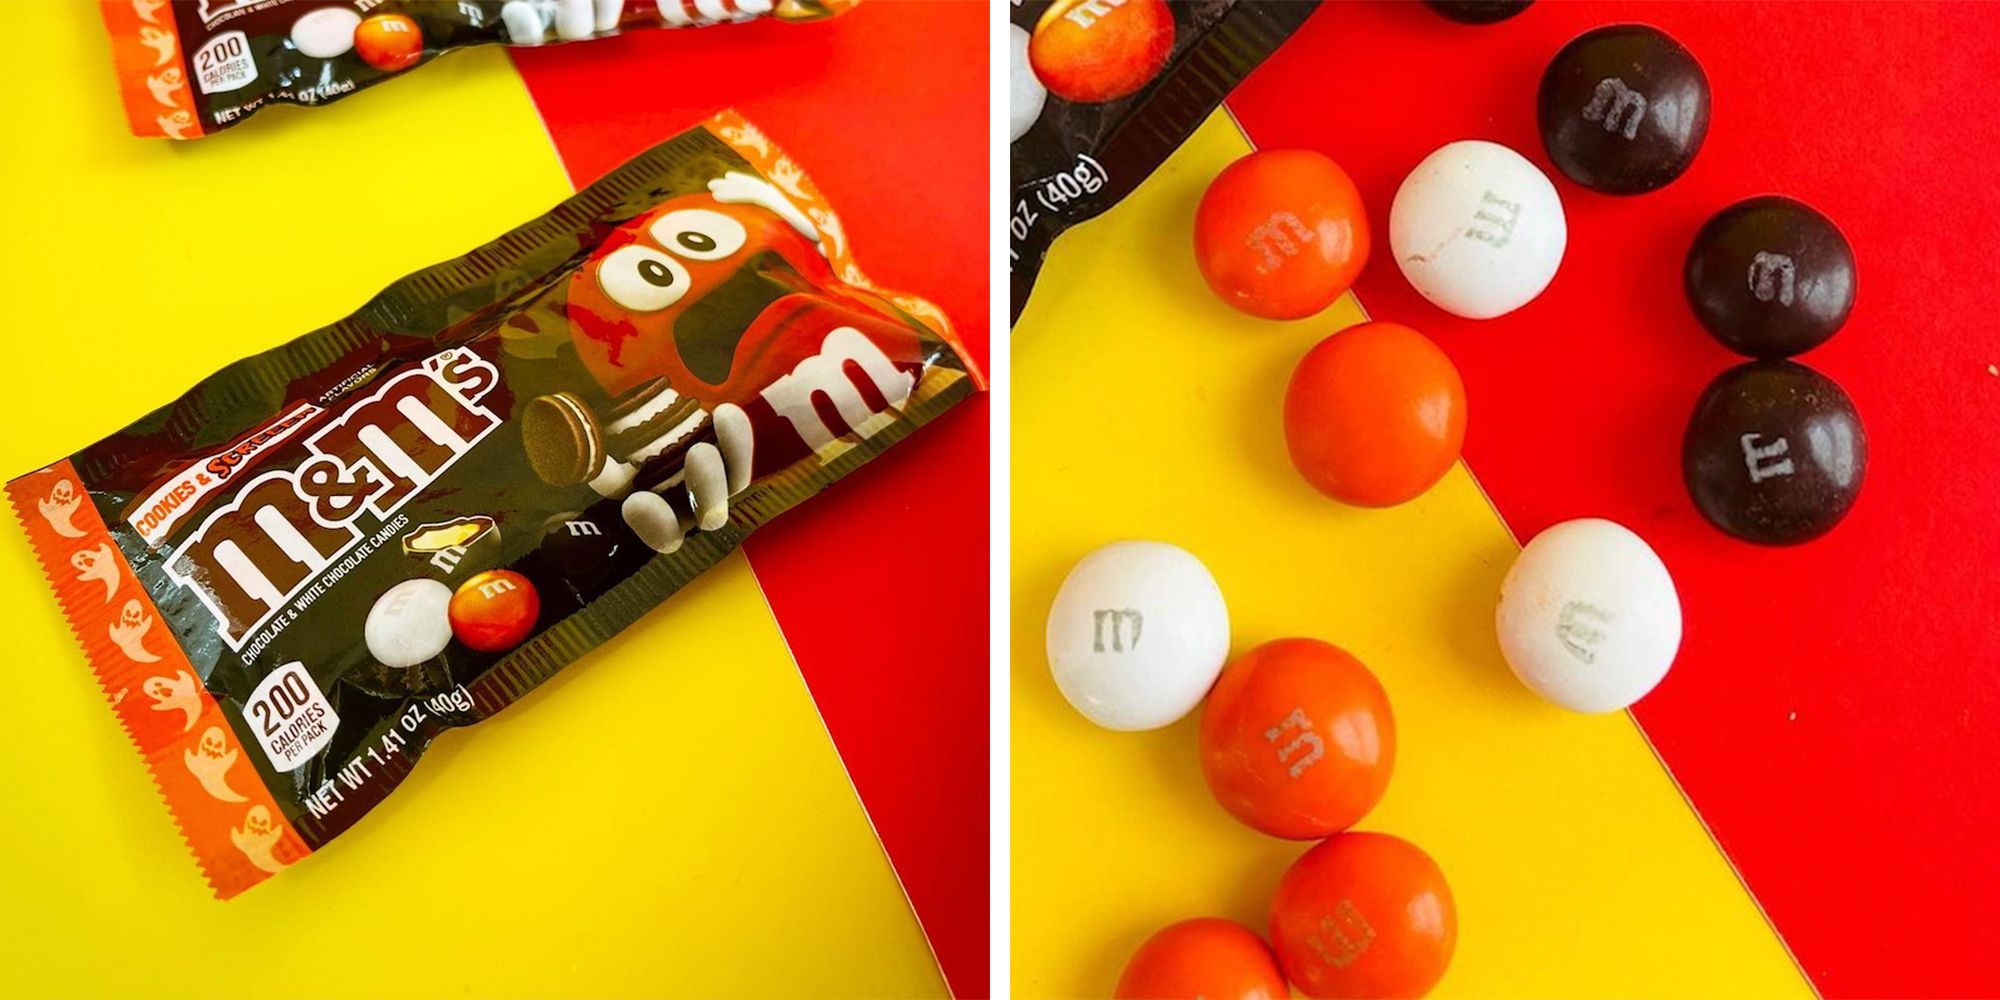 New M&M's Flavor For Halloween! #MMsGetCorny - Making Time for Mommy